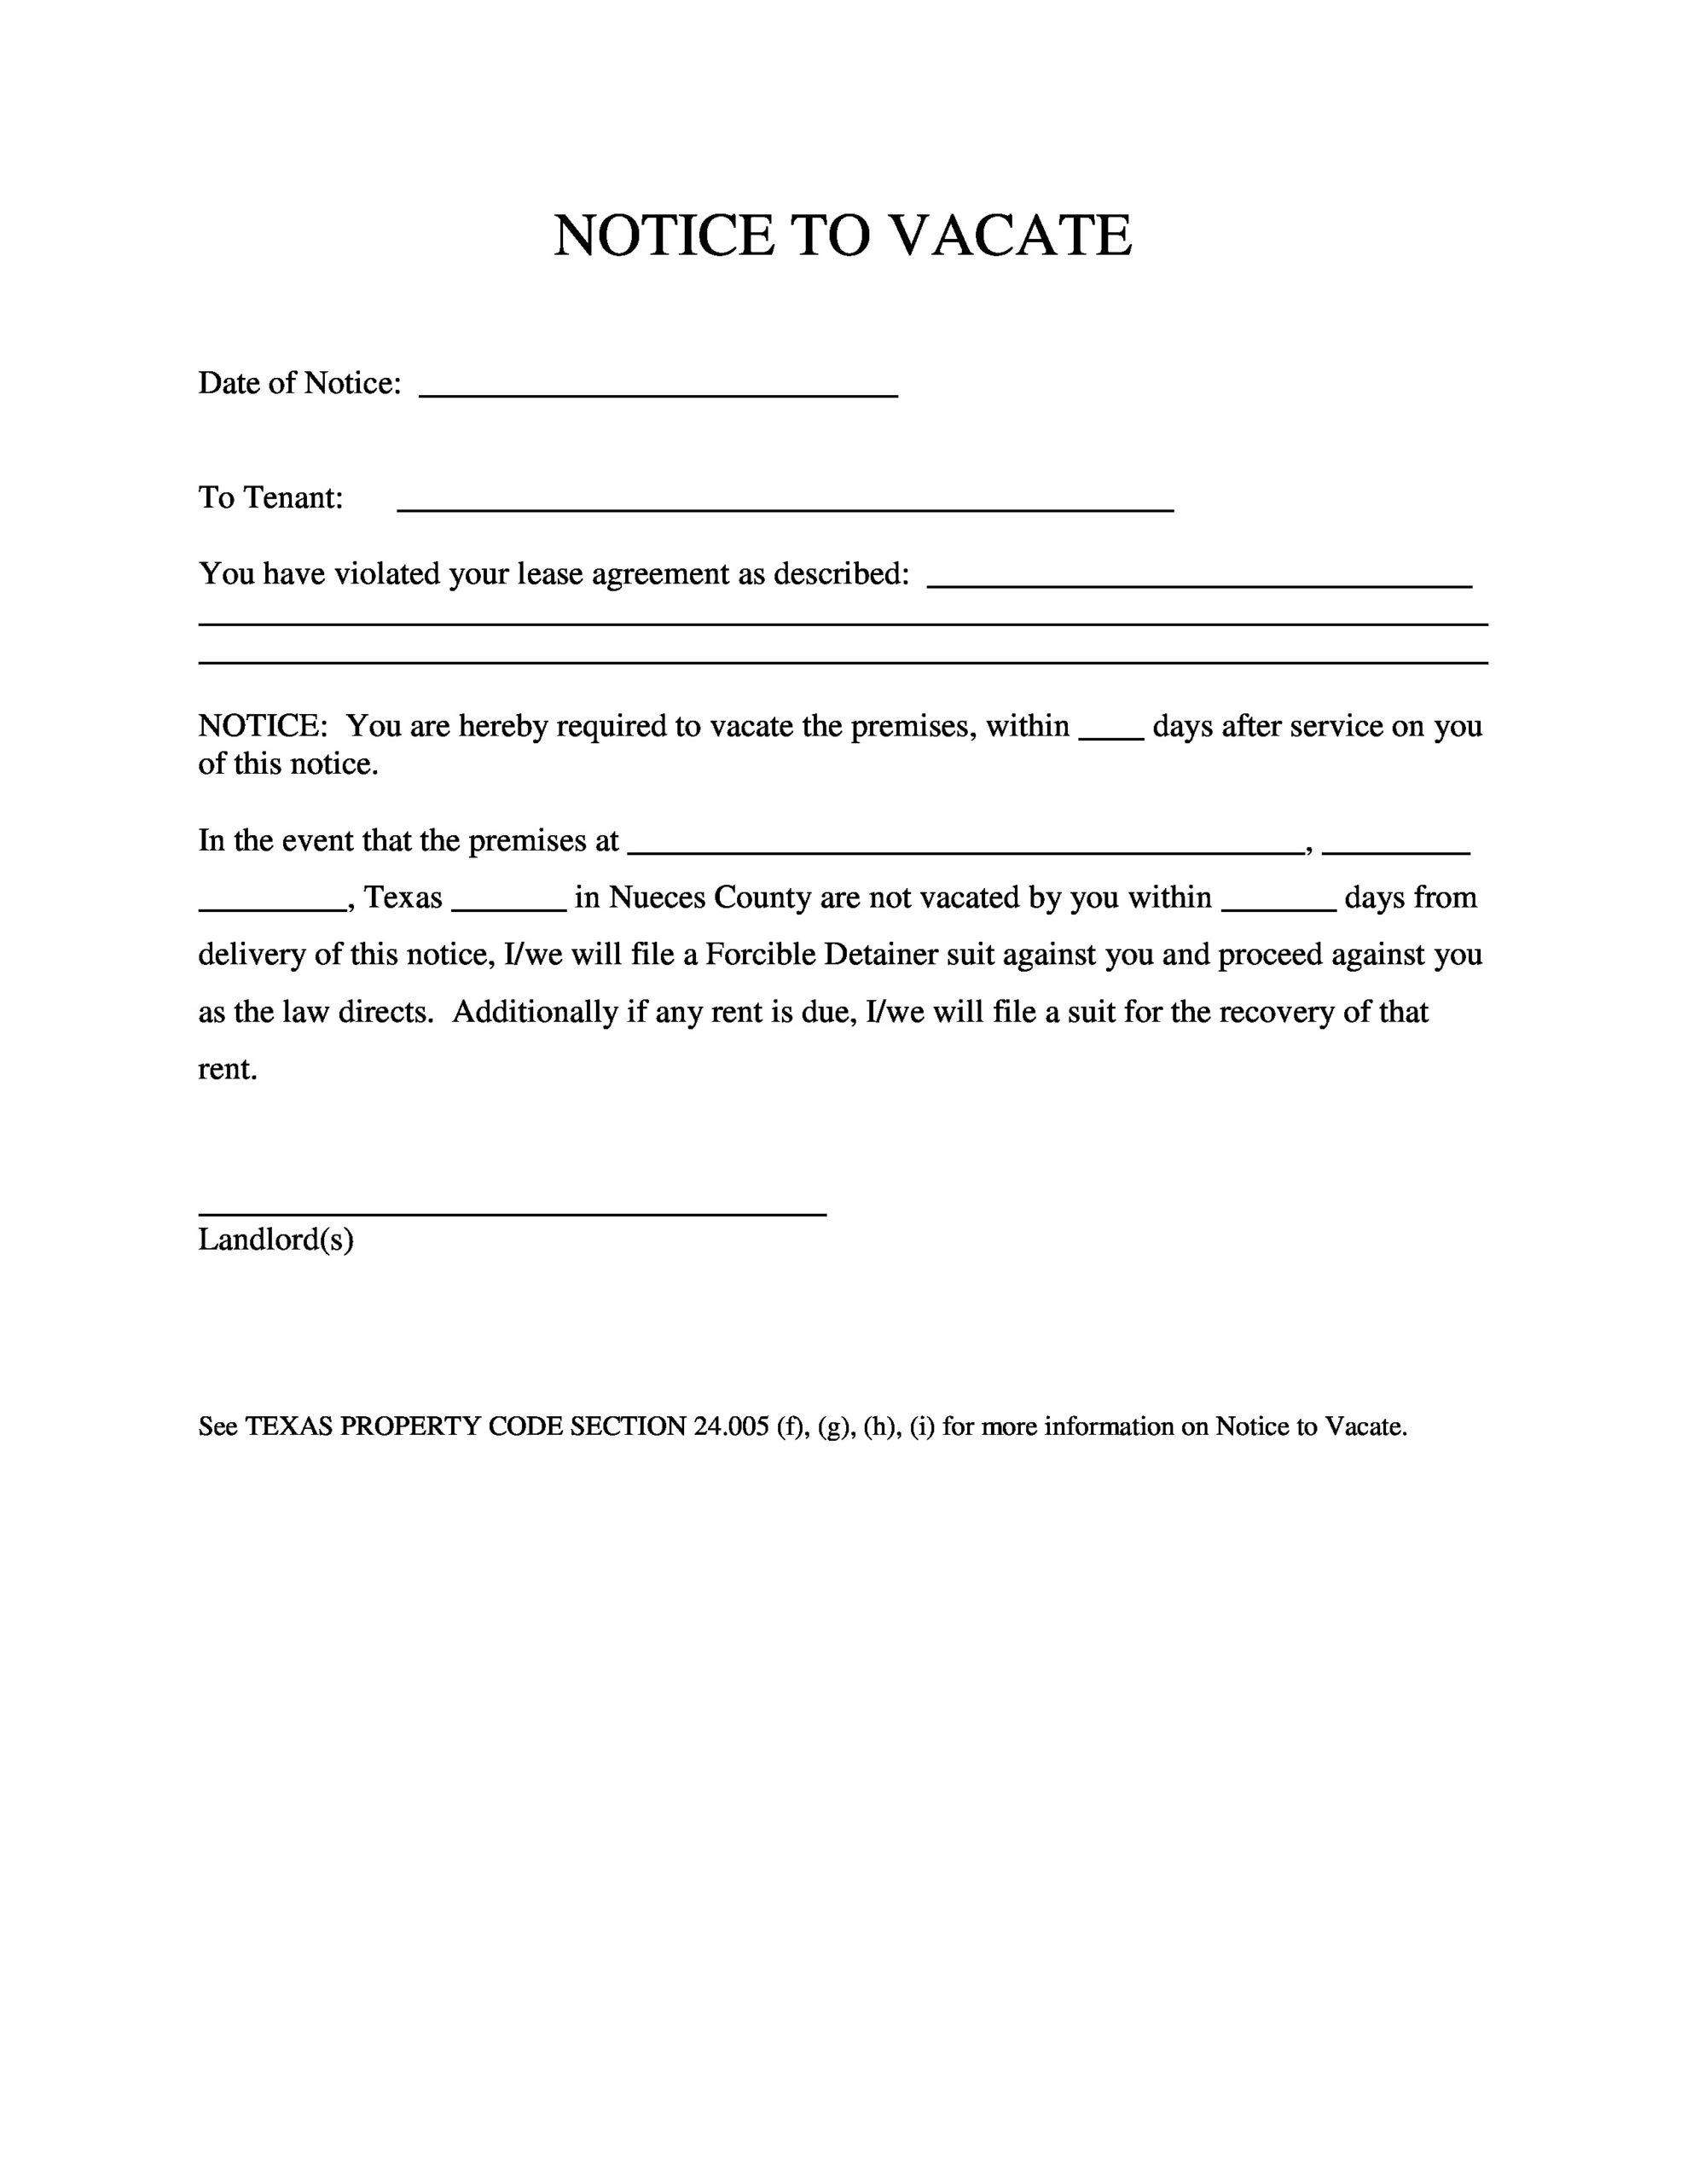 Vacating The Premises Letter To Landlord Collection Letter Template